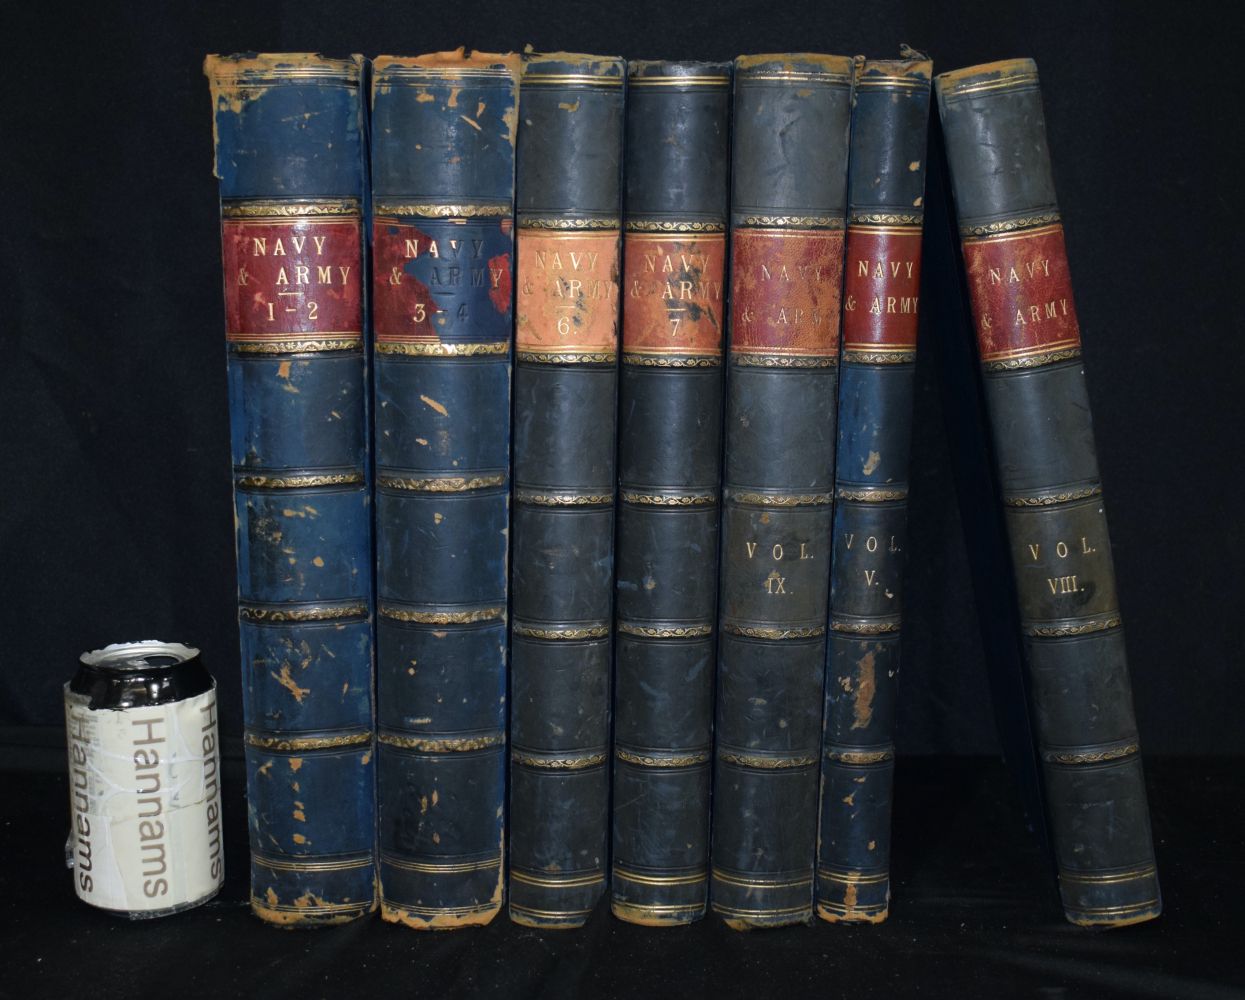 A collection of Navy and Army illustrated , 9 volumes over 7 books , published by Huson & Kearns 5.5